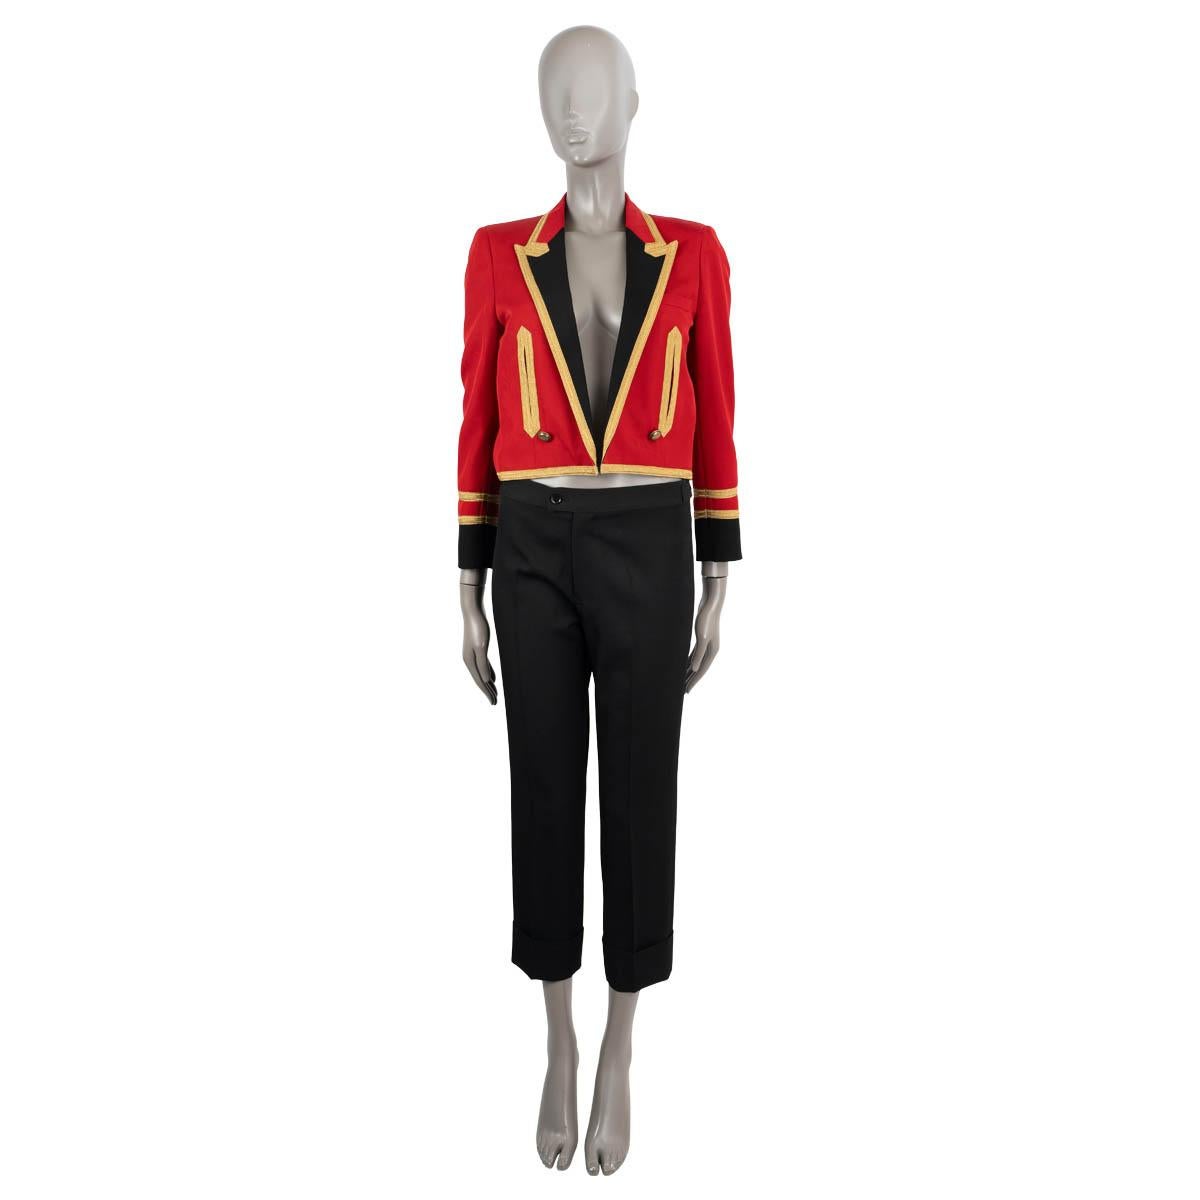 100% authentic Saint Laurent Spencer jacket in red wool (100%). This military jacket features a cropped silhouette, metallic gold trims, contrast black lapels and cuffs and two slit pockets on the front. Lined in silk (100%). Has been worn and is in